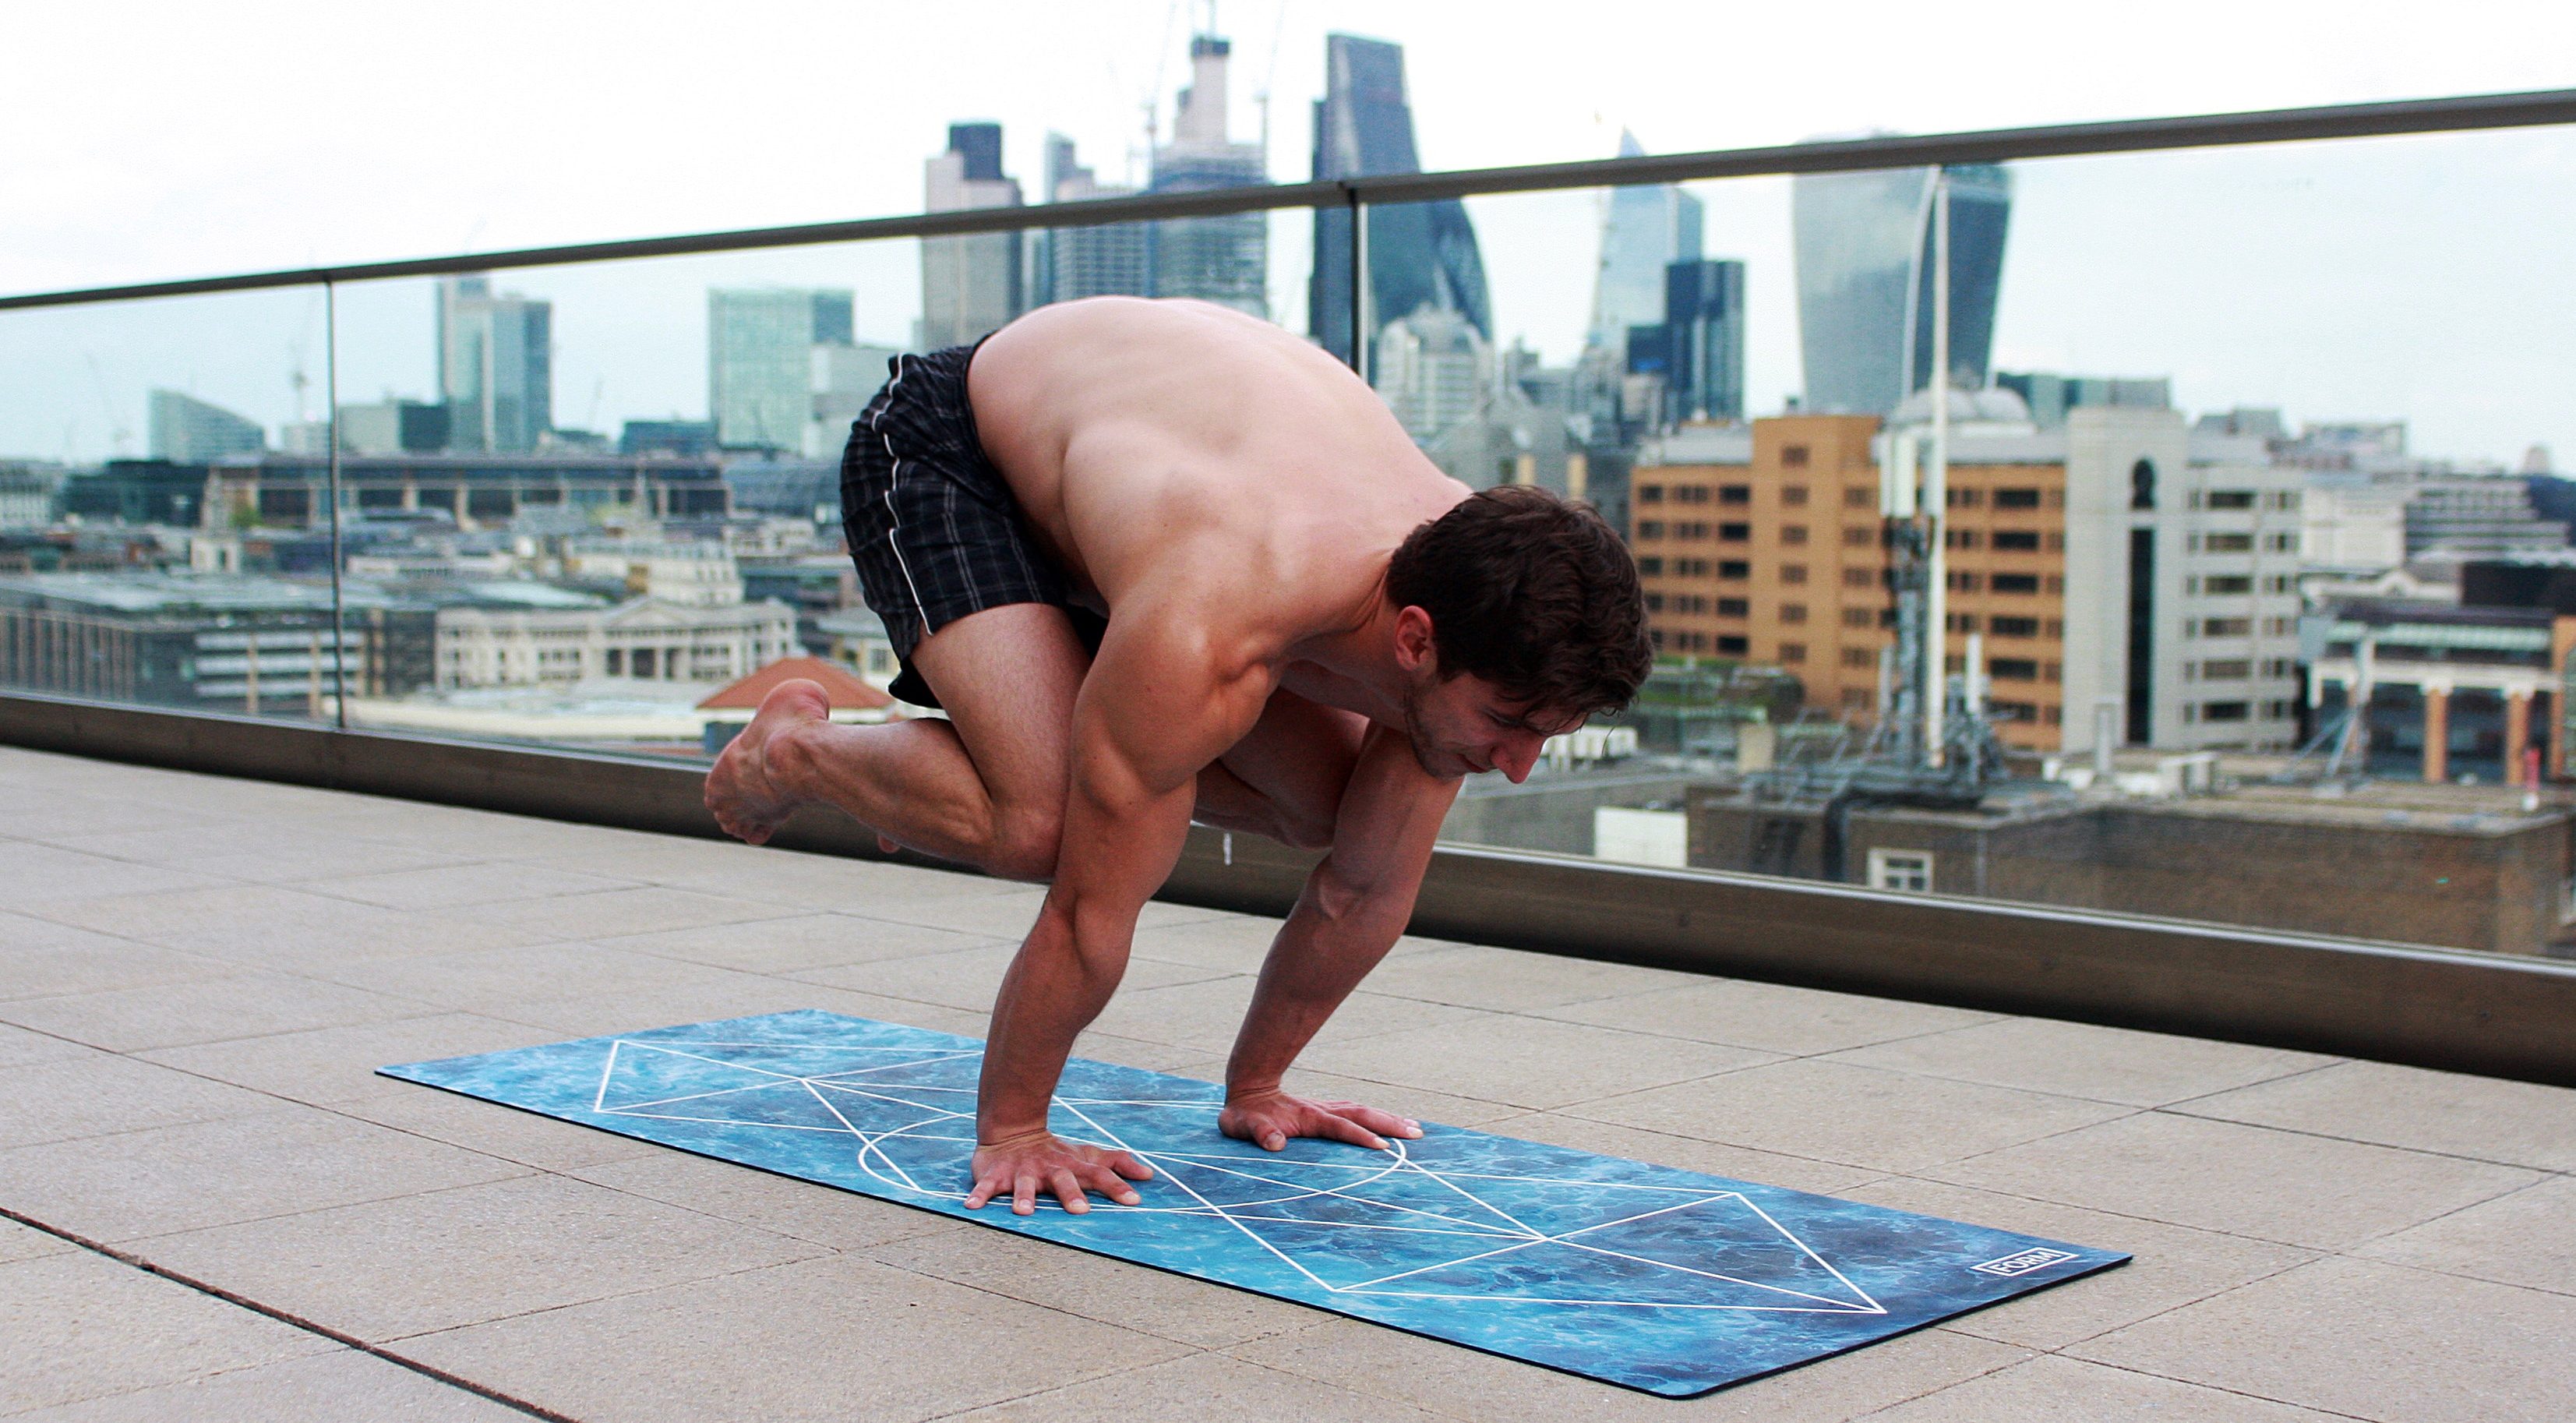 ‘I struggle with sport but found balance in yoga’